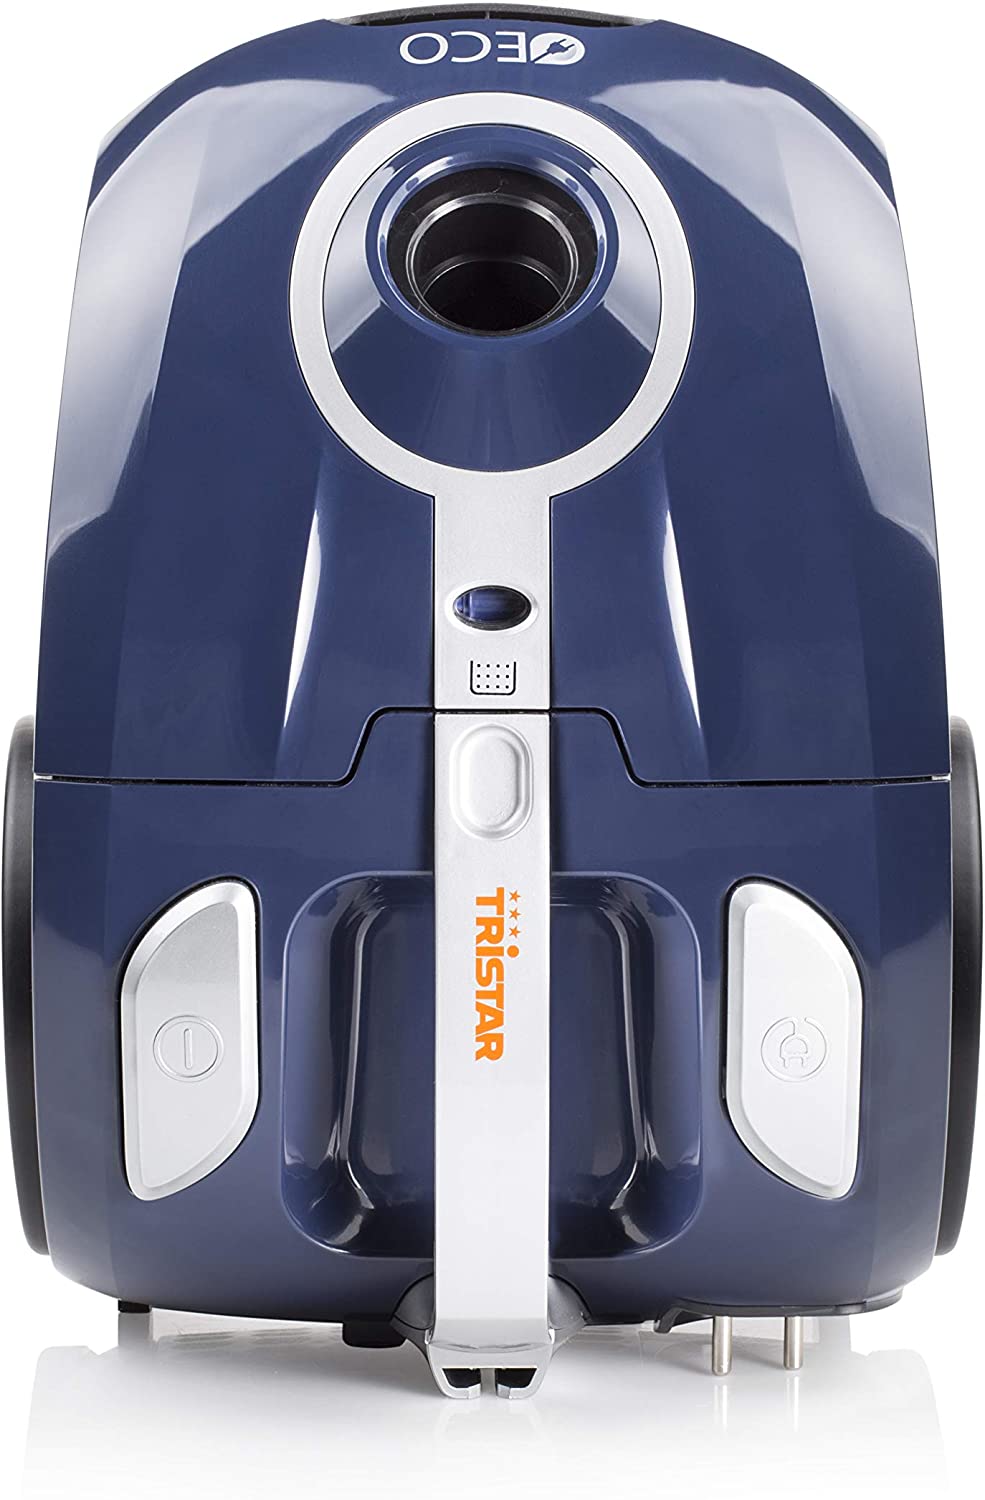 Tristar SZ-1920 Compact Vacuum Cleaner (4.1 kg) with 2 Litre Capacity - 5 Metre Cable Lead (700 Watt / 80 dB)